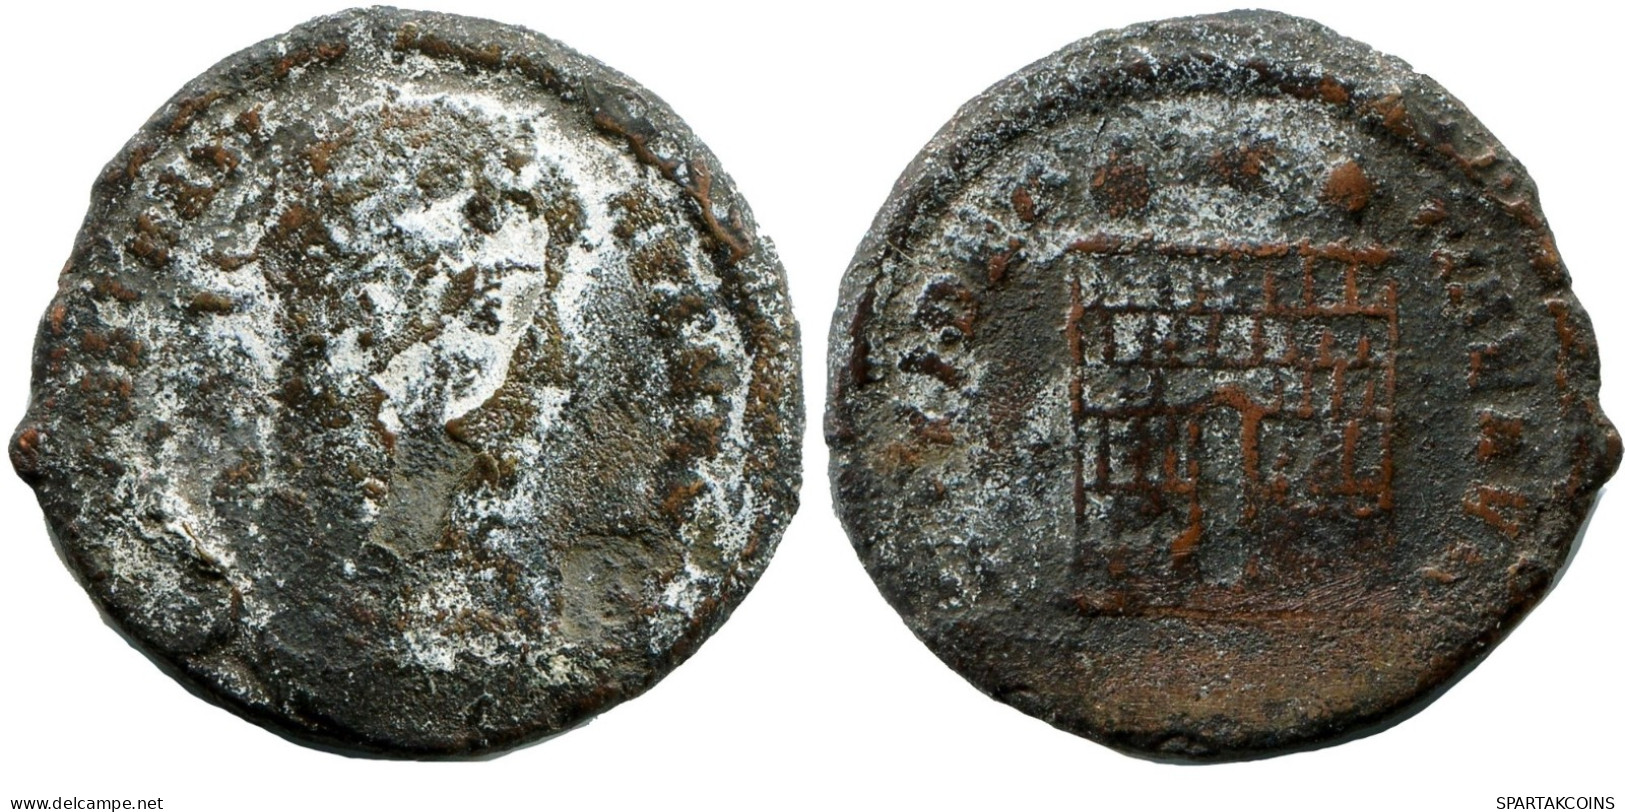 CONSTANTINE I MINTED IN CYZICUS FOUND IN IHNASYAH HOARD EGYPT #ANC10979.14.E.A - The Christian Empire (307 AD Tot 363 AD)